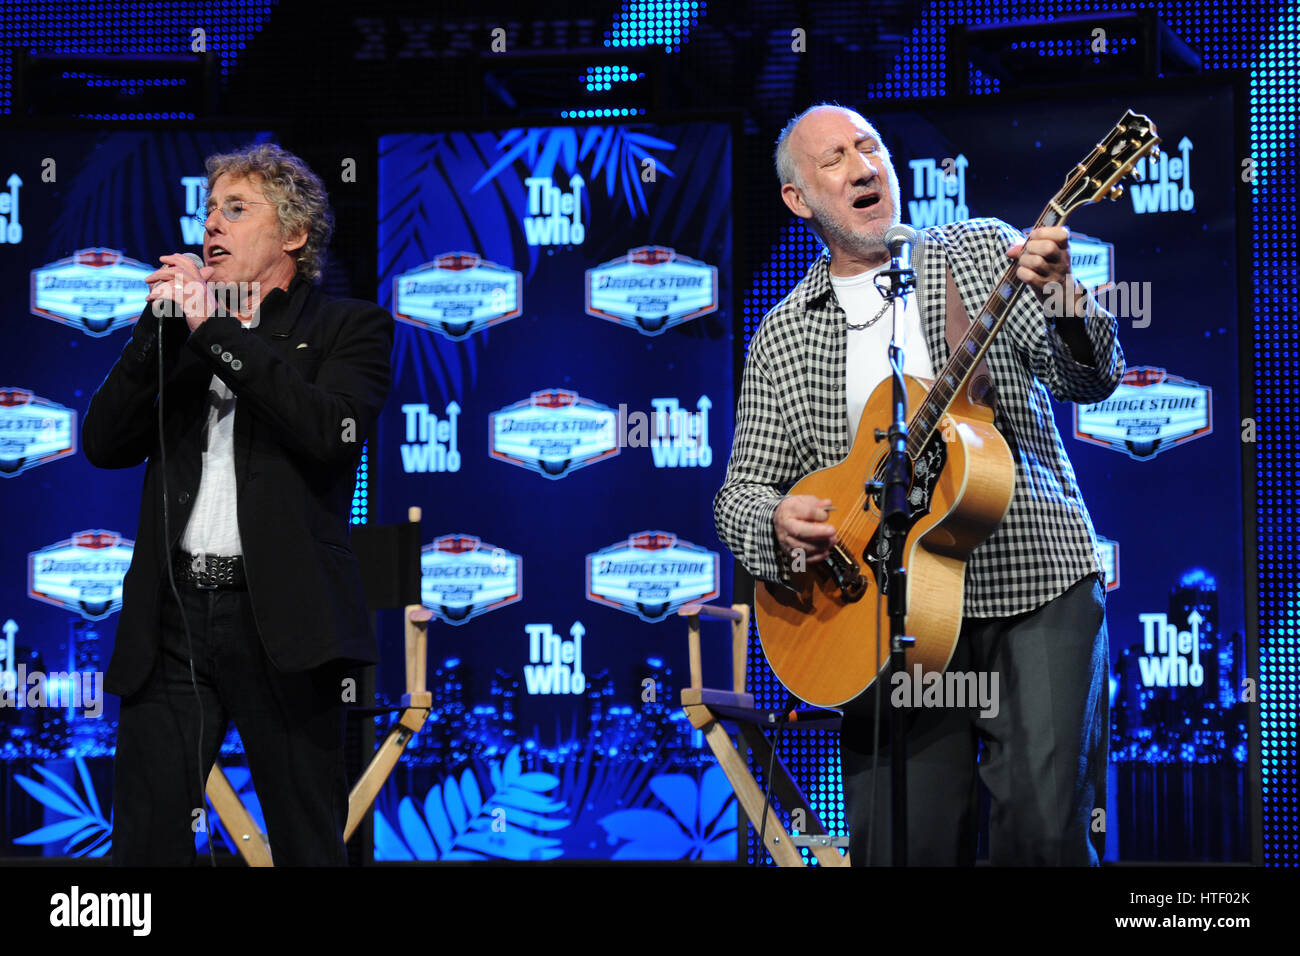 Roger Daltrey and Pete Townshend of the Who perform at the Super Bowl XLIV Halftime Press Conference at Broward County Convention Center on February 4, 2010 in Fort Lauderdale, Florida Stock Photo